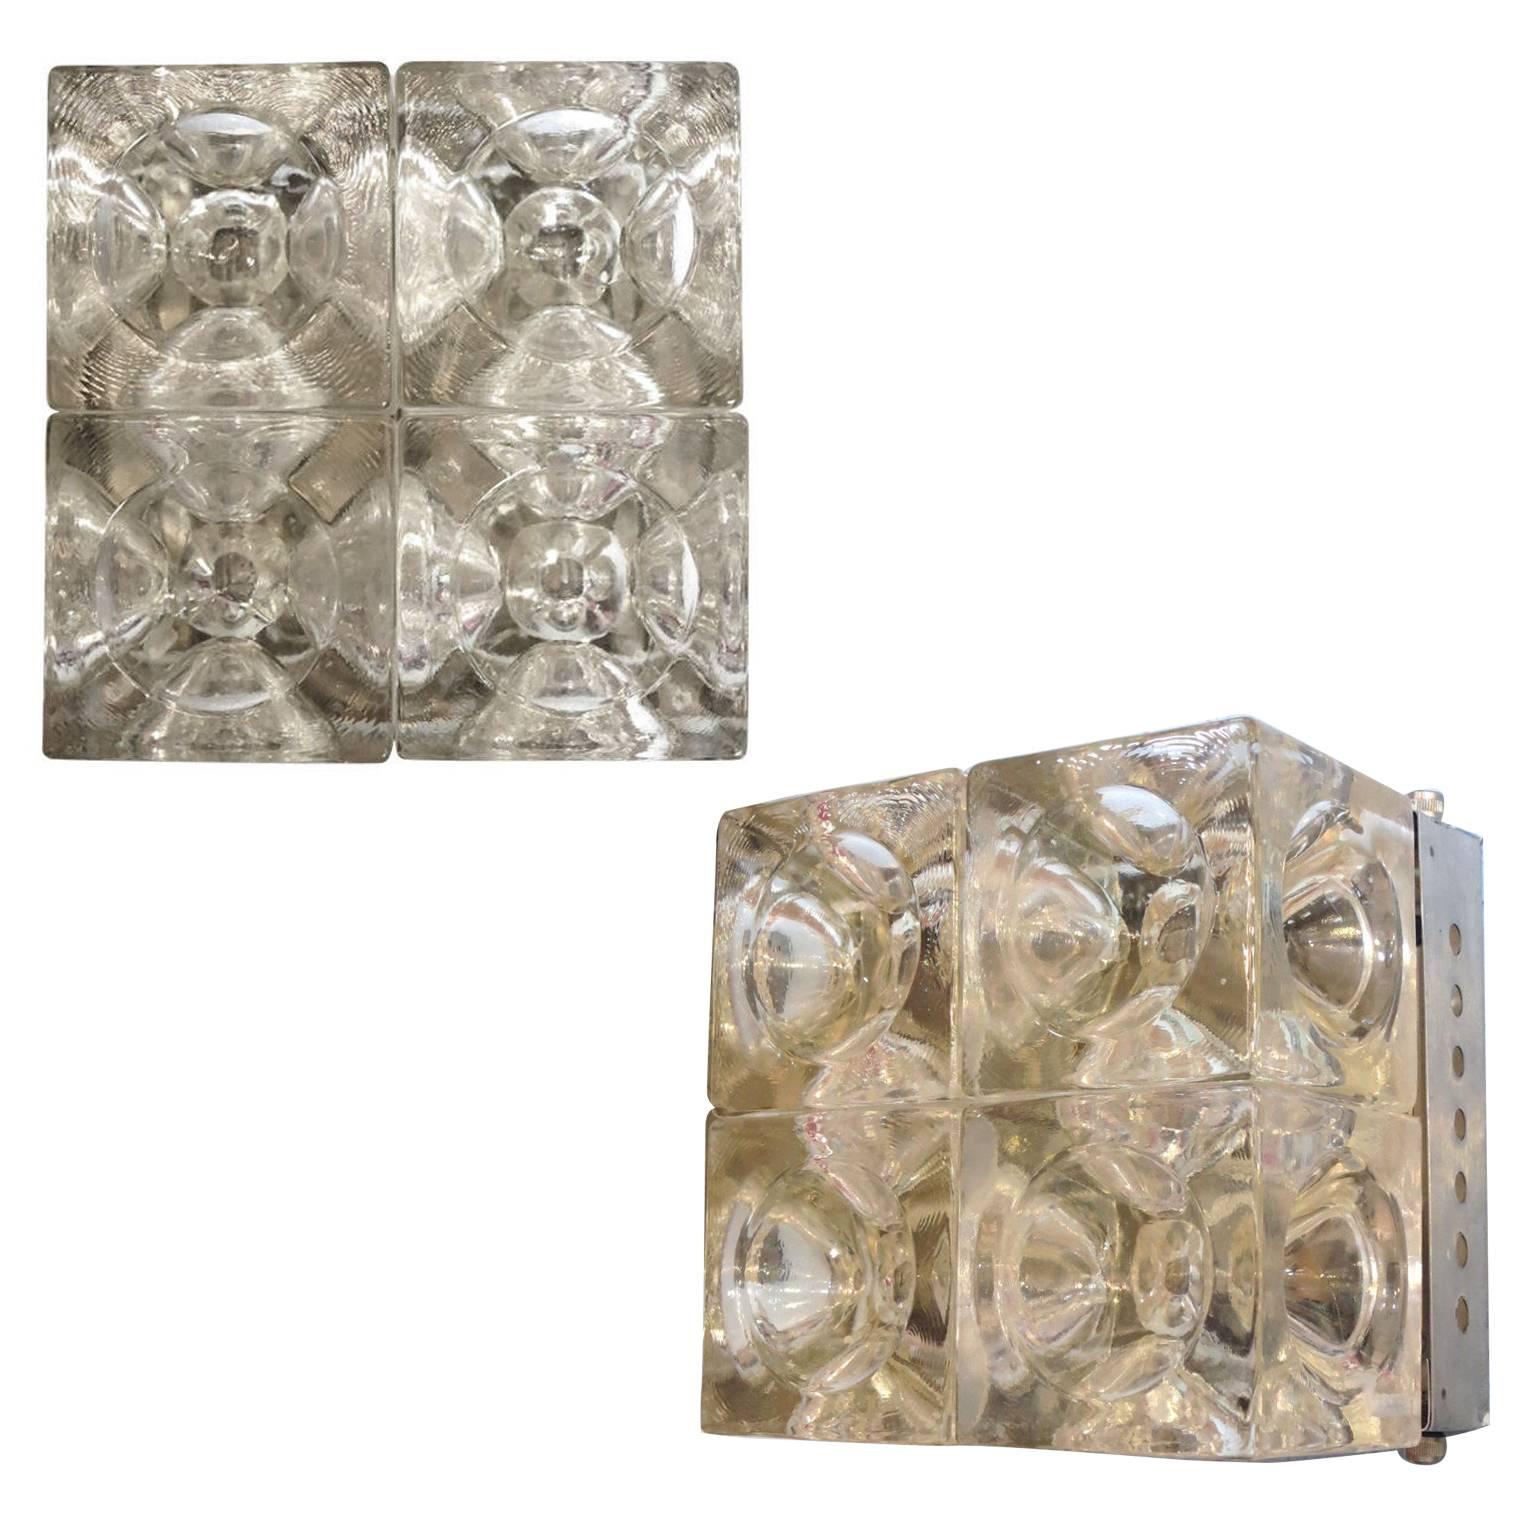 Pair of Cube Sconces / Flush Mounts by Poliarte